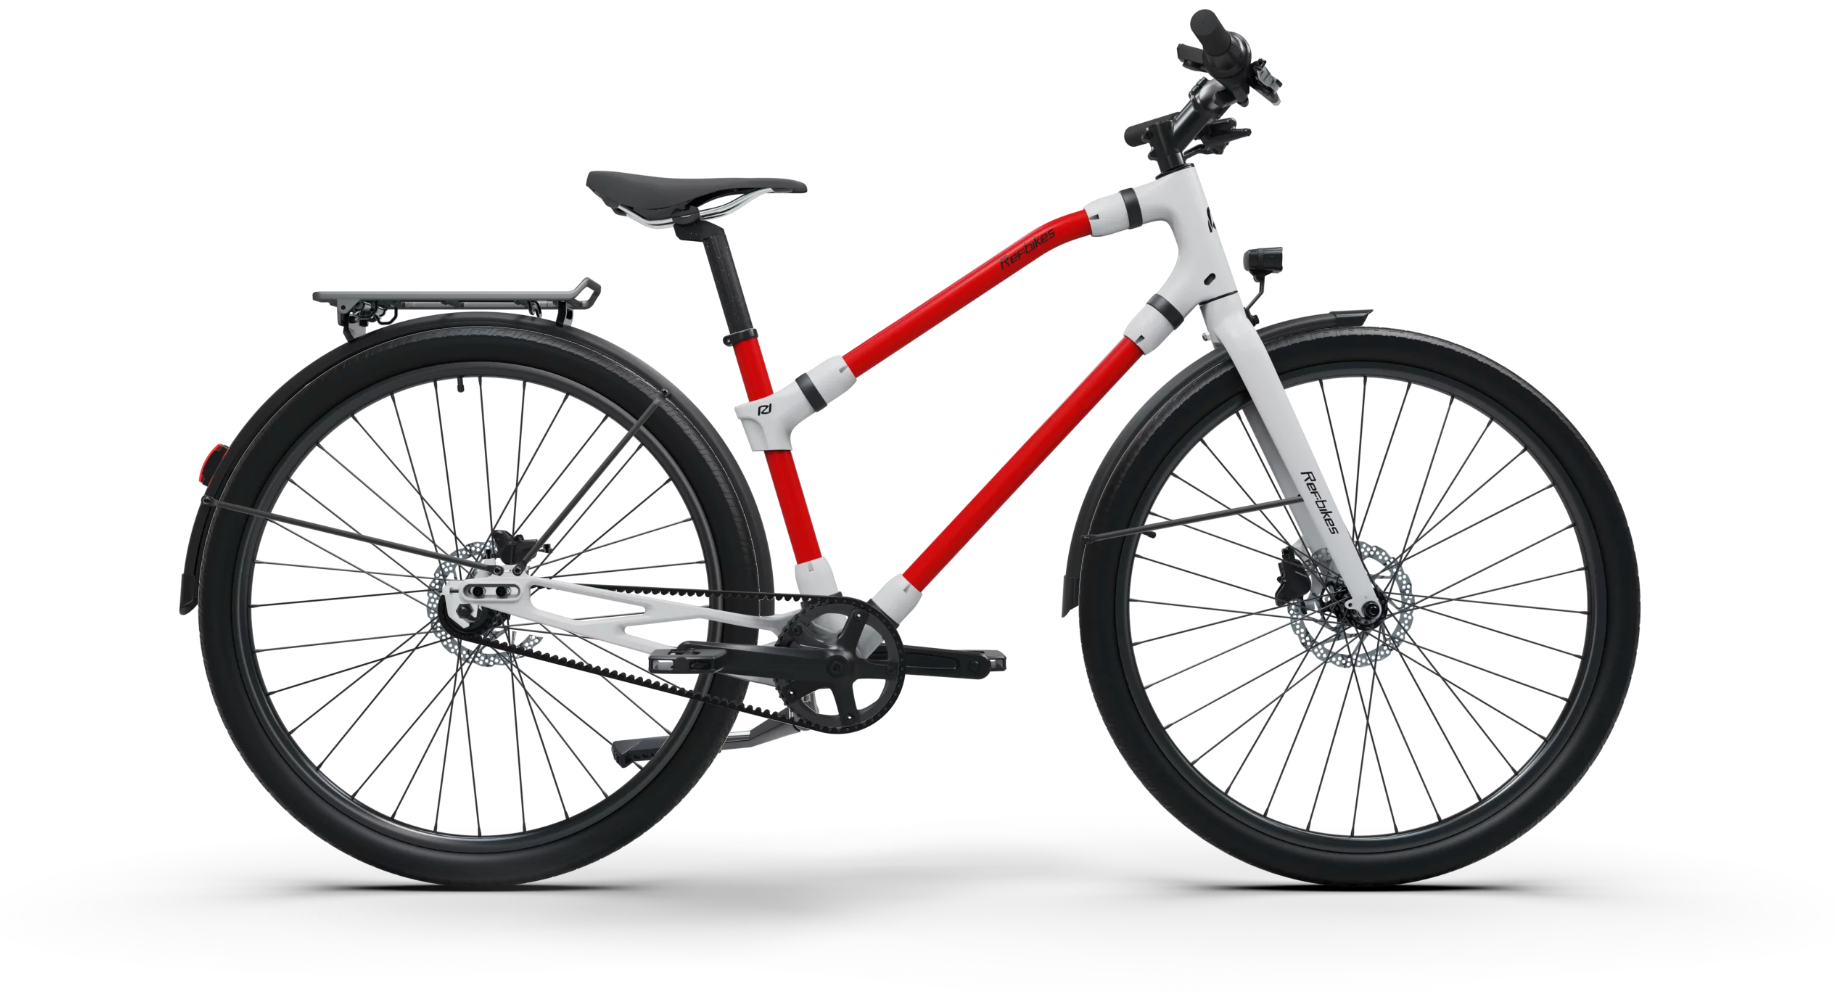 Striking red and white Ref Urban bike, designed for performance and style with a sustainable edge.